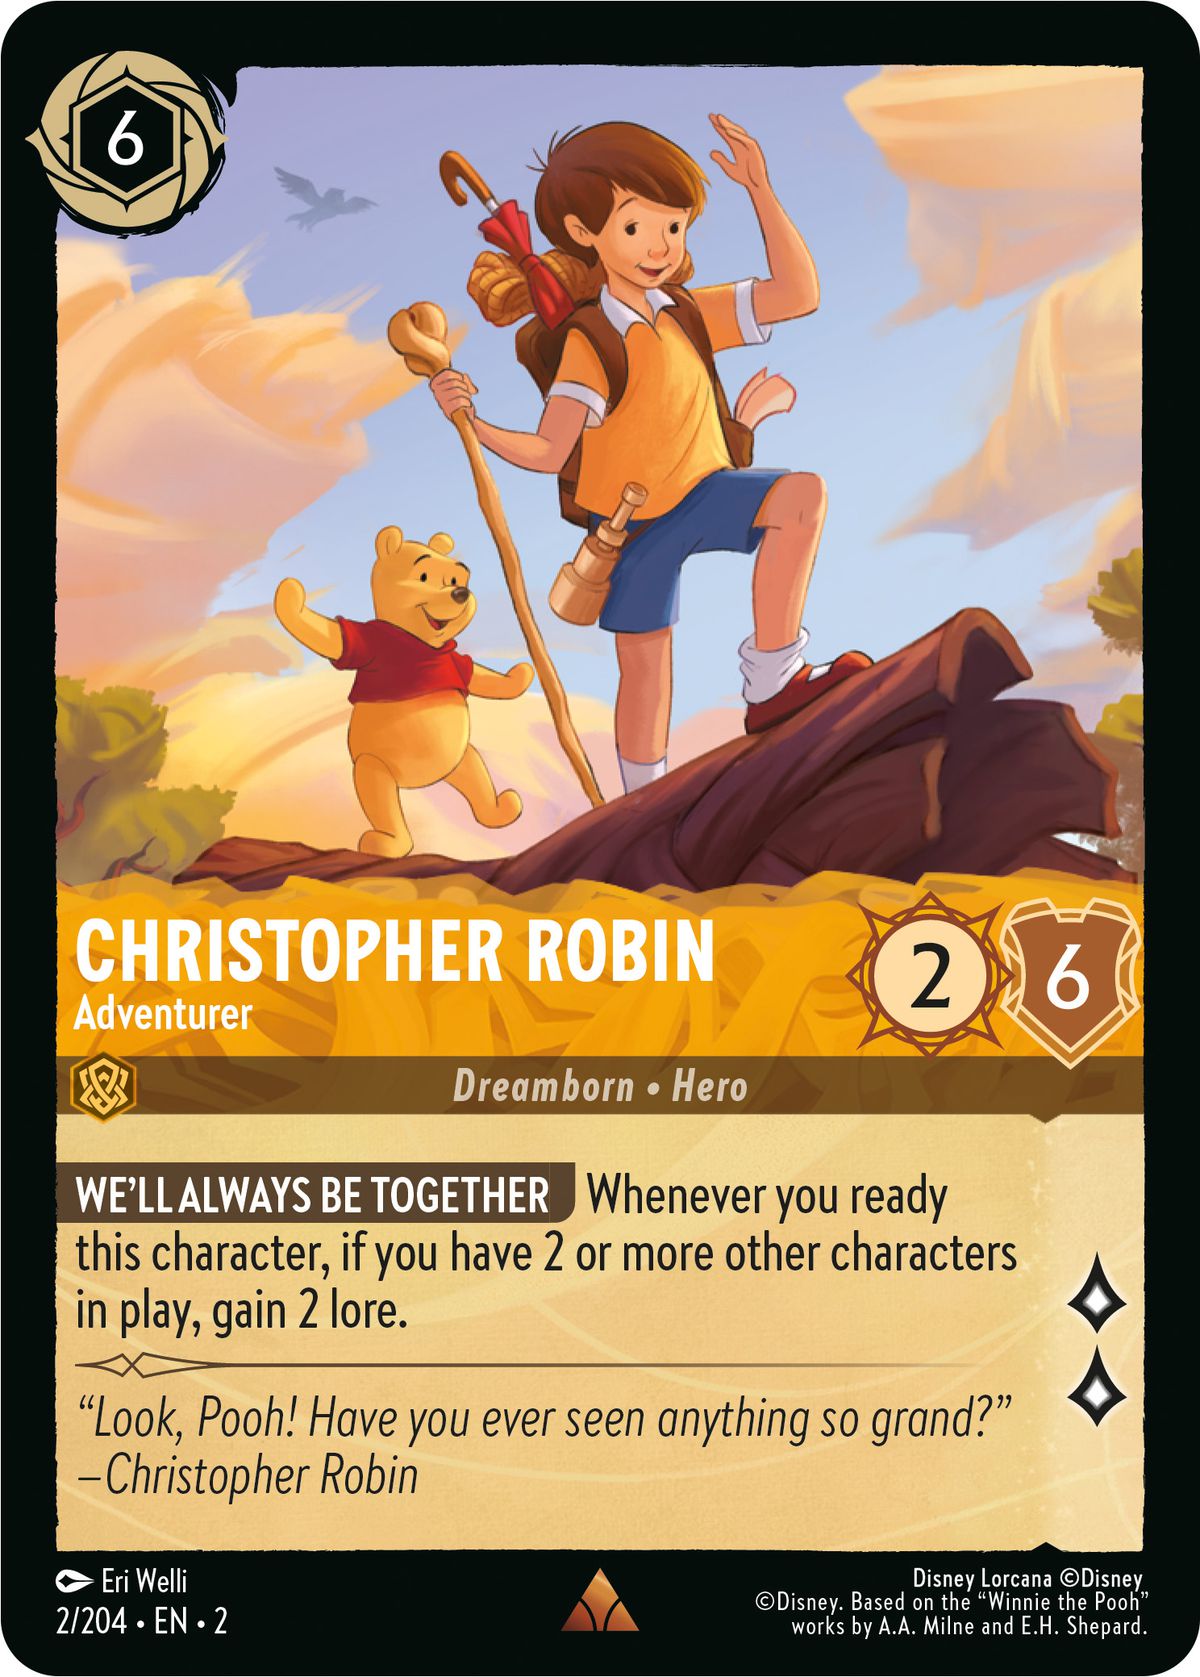 Christopher Robin, Adventurer gets two lore when you ready them — but only if you have at least two other characters in play.